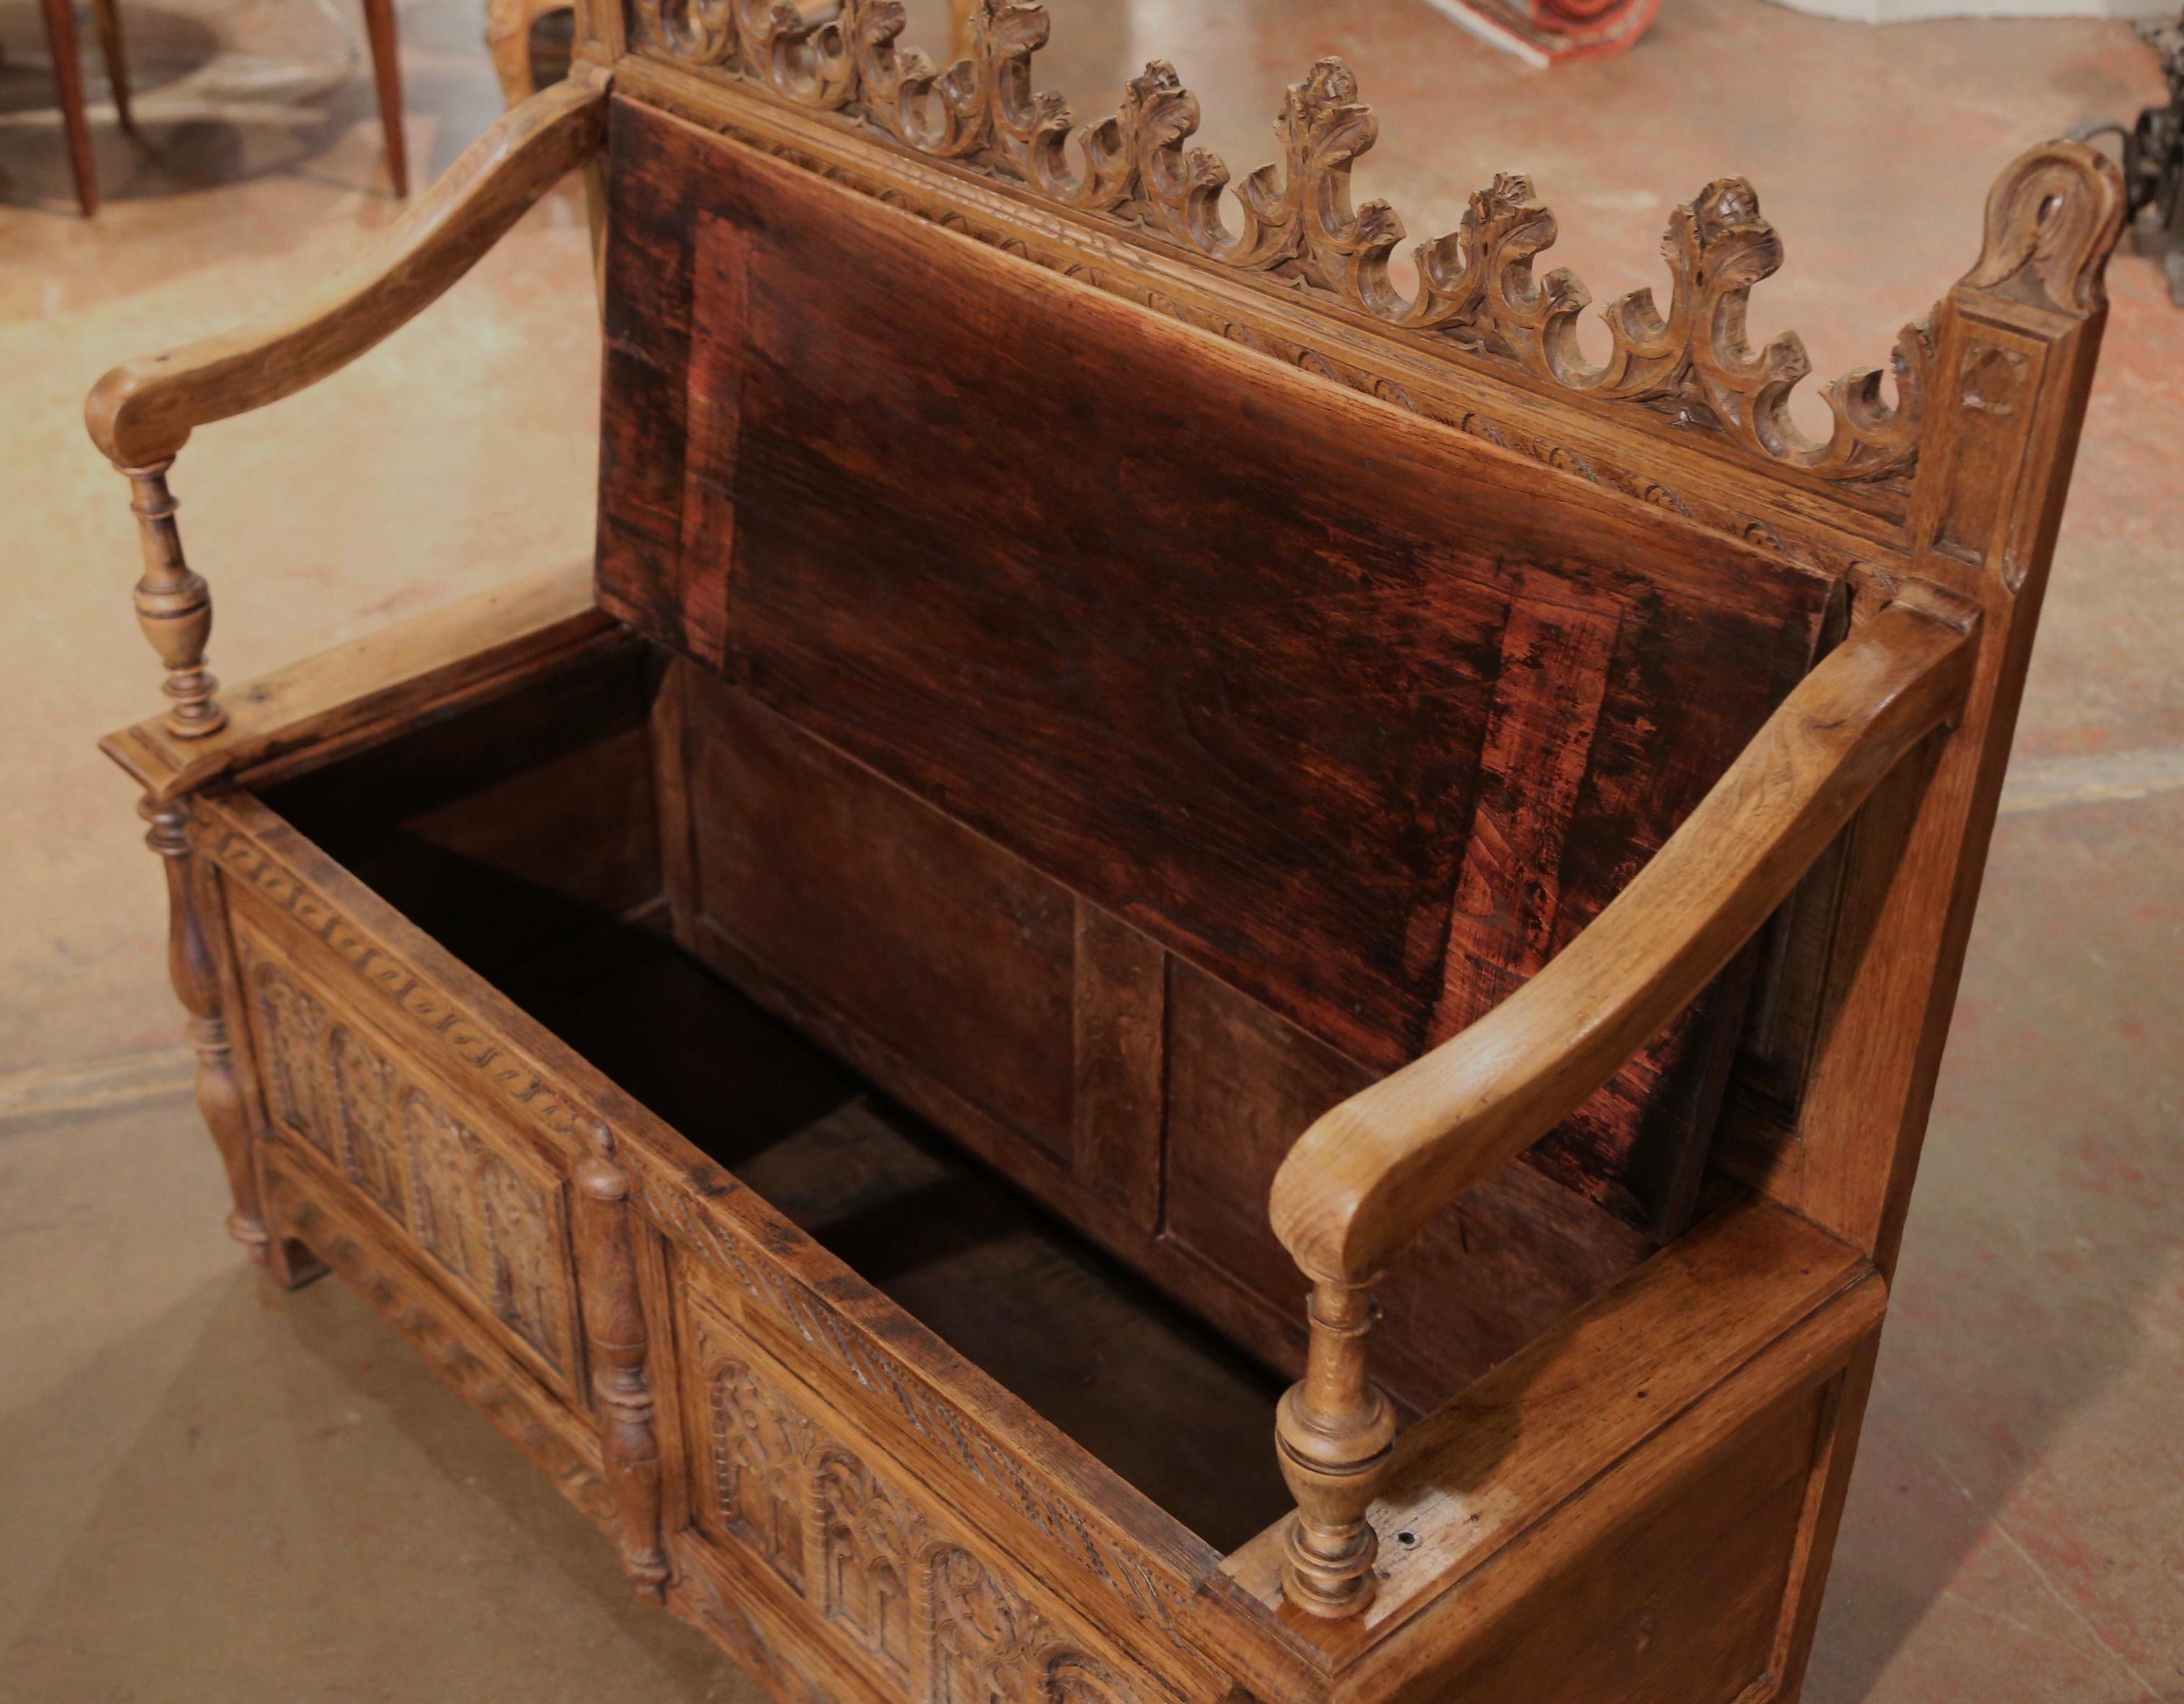 19th Century French Gothic Revival Carved Bleached Oak Hall Bench with Trapdoor For Sale 4